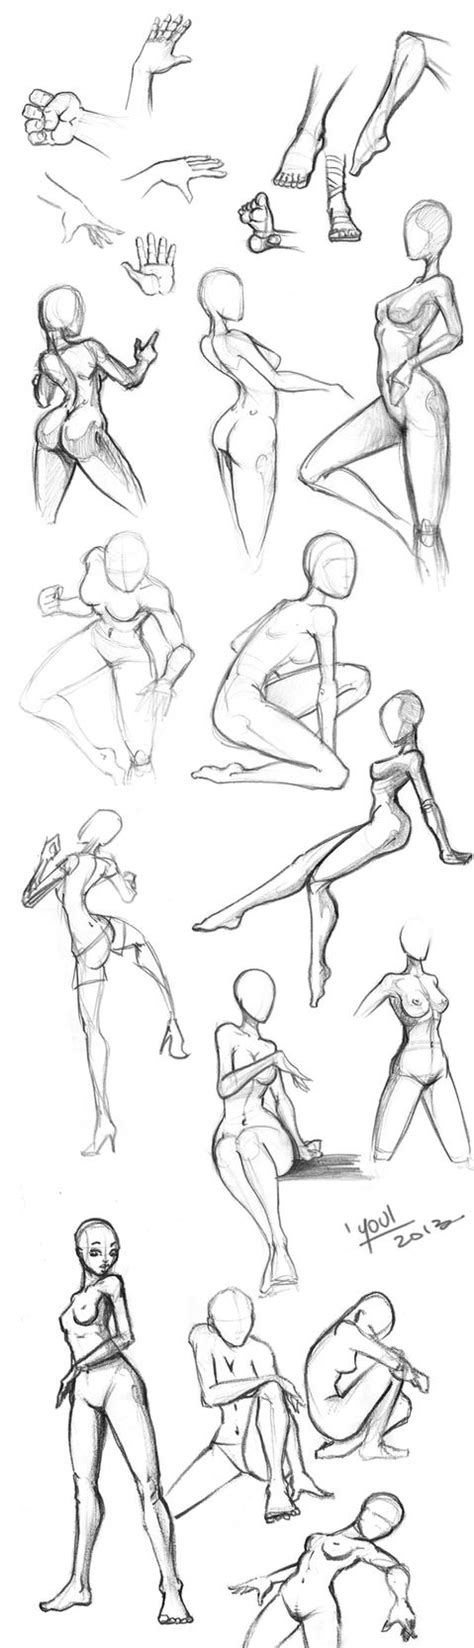 Youl Sketches Juin2013 Poses By Youldesign On Deviantart